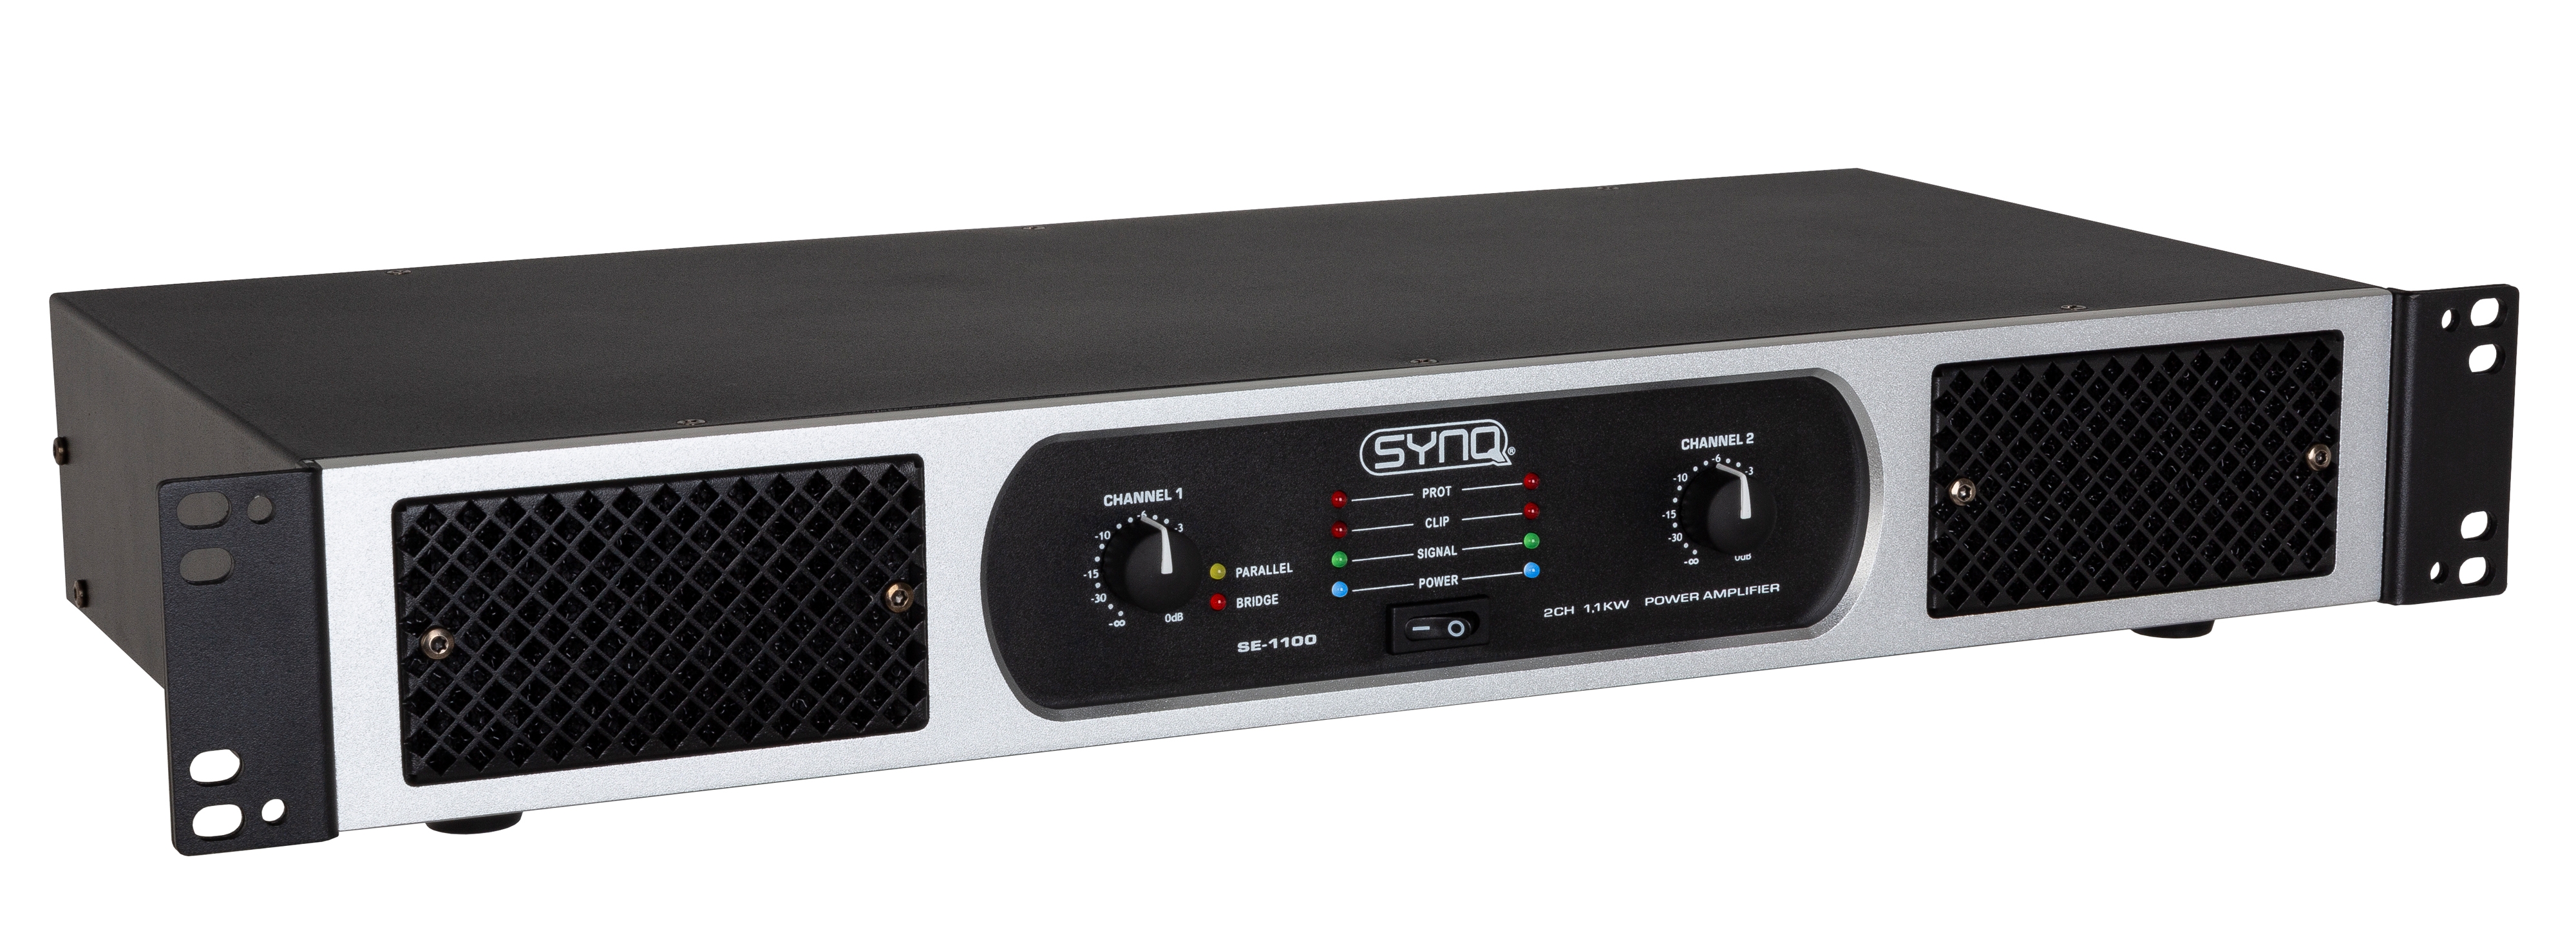 2x 550Wrms CLASS-D amplifier, lightweight (only 3,85kg) with powerful low-frequency reproduction and crystal-clear high frequencies. Perfect for clubs, rental, theater, Ǫ